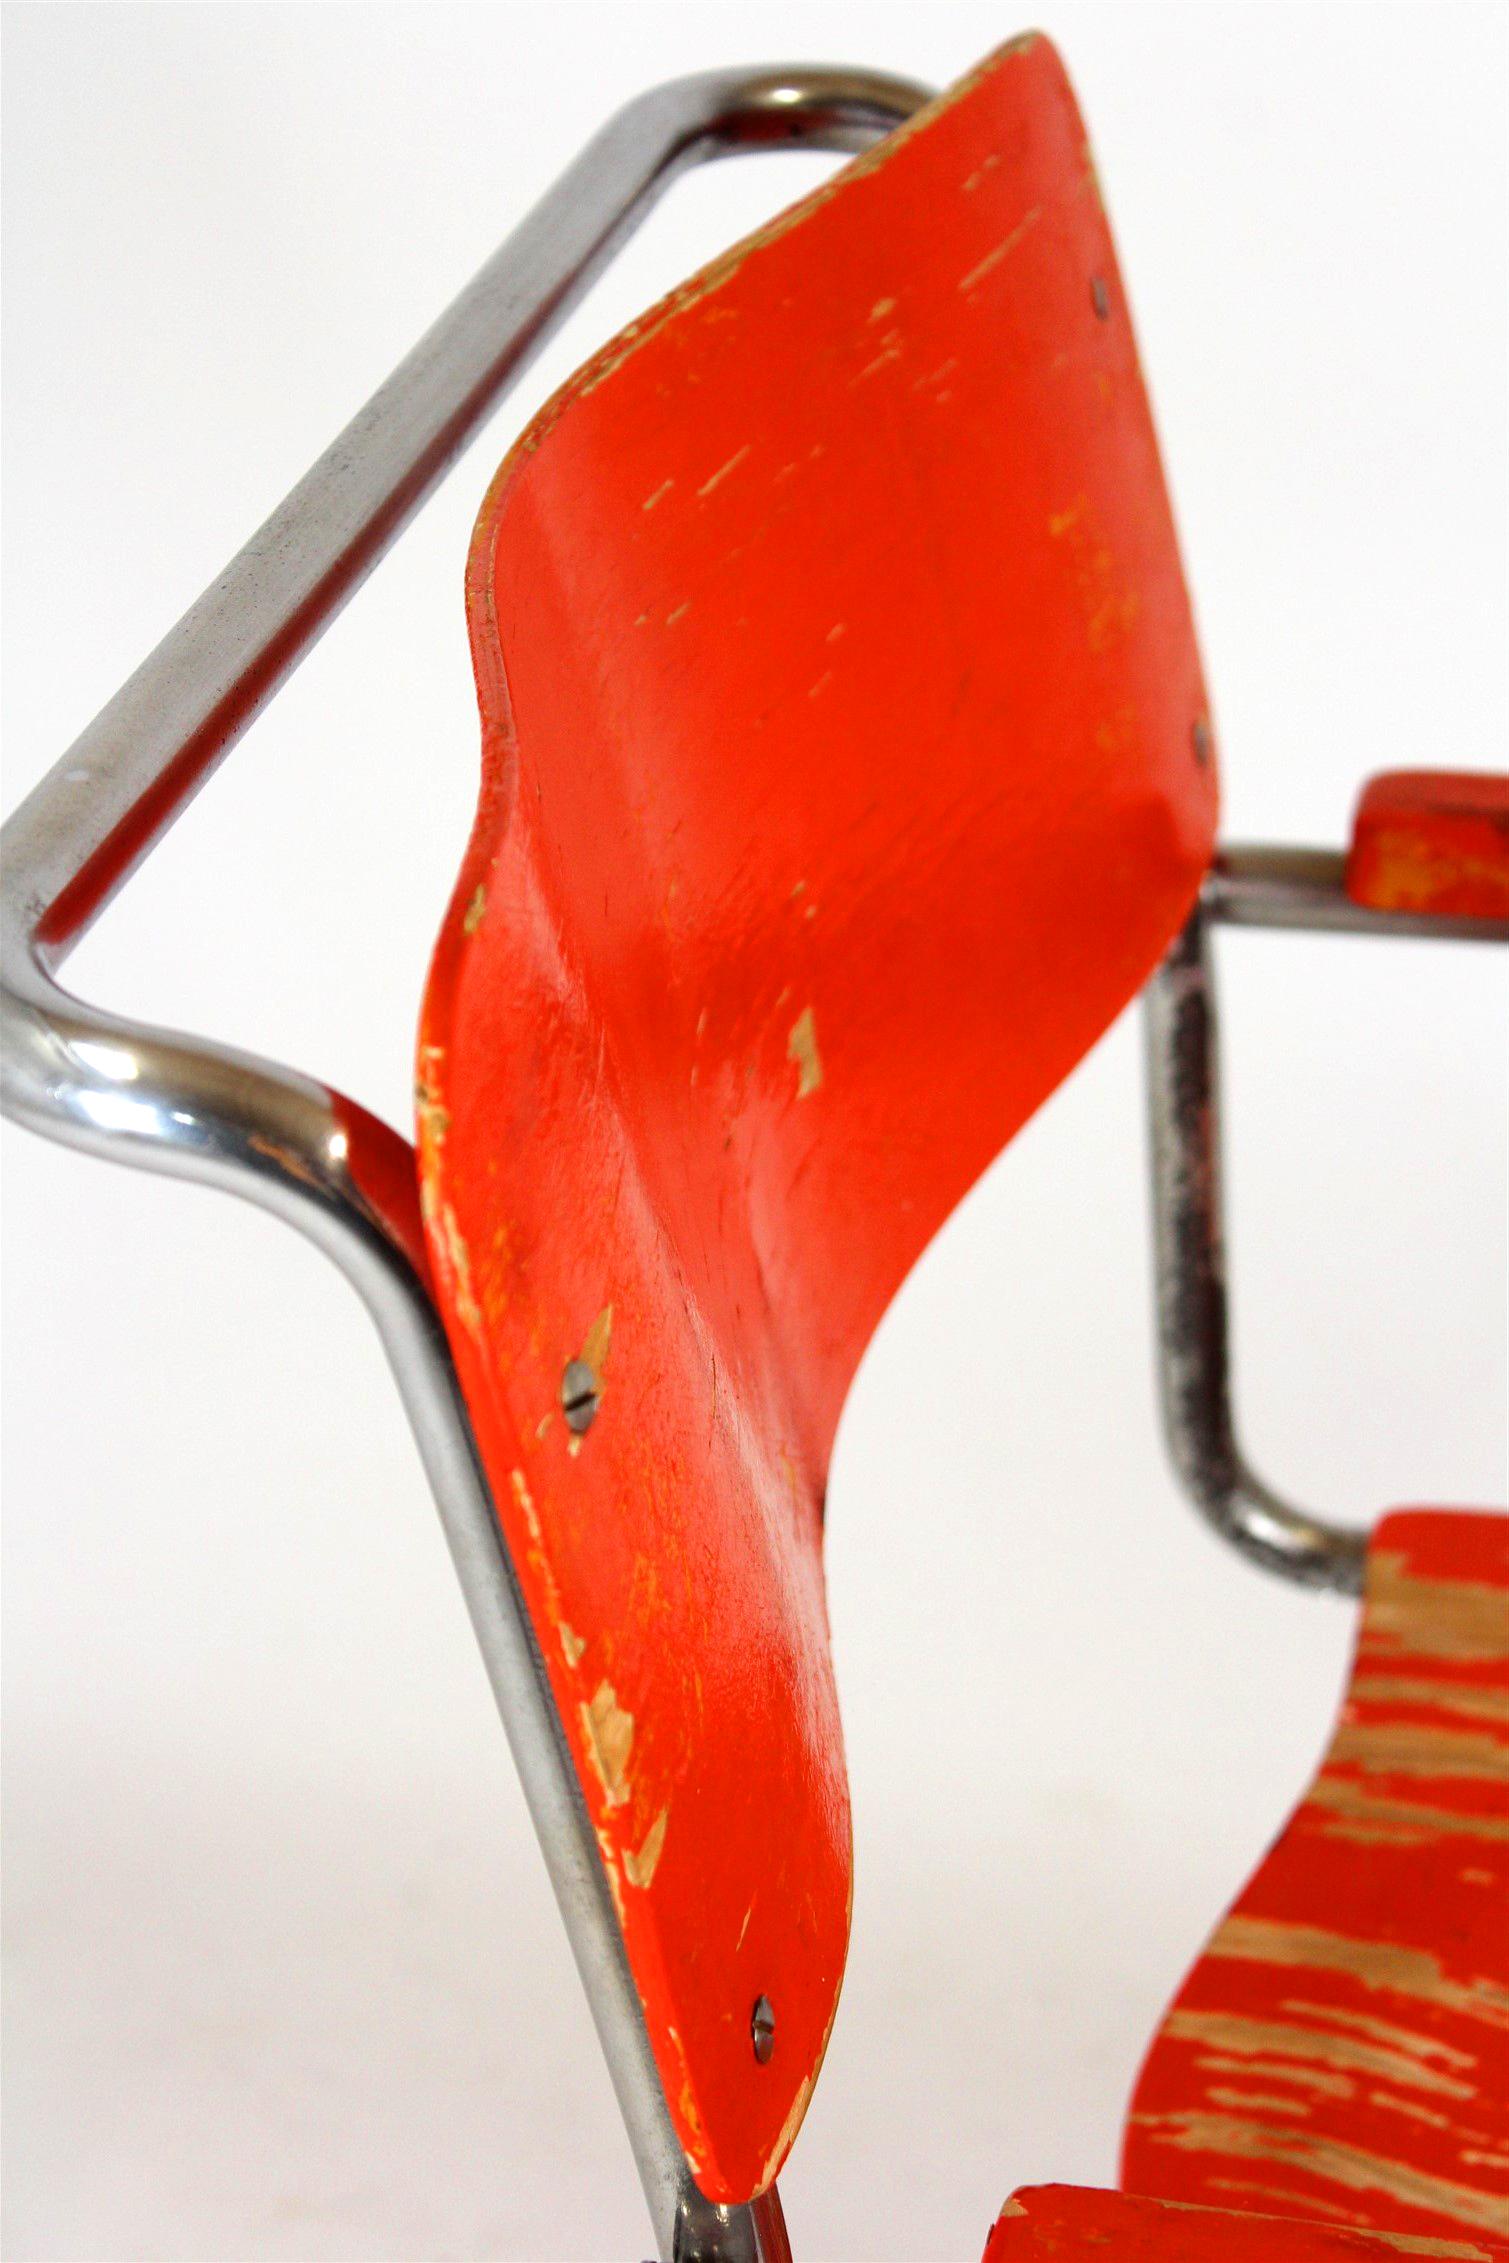 Bauhaus B34 Cantilever Chair in Plywood & Chrome by Marcel Breuer, 1930s For Sale 8